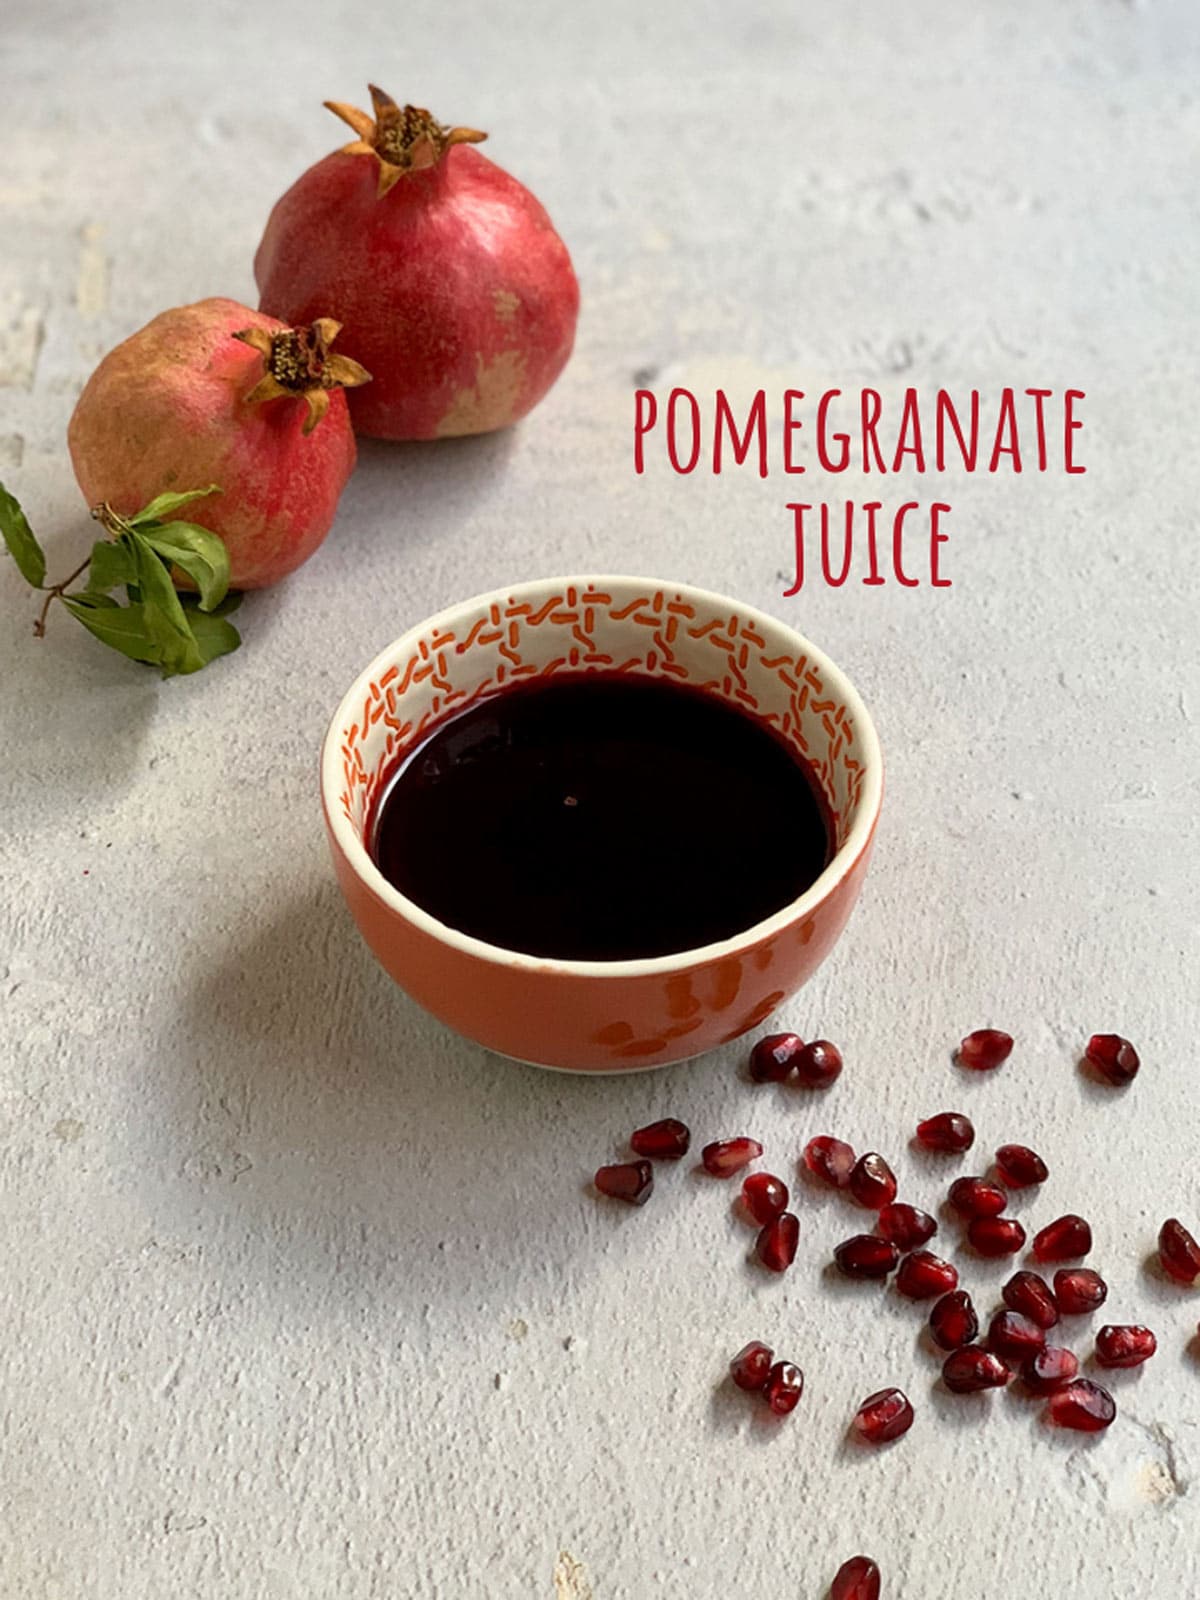 A bowl of dark red pomegranate juice next to a scattering of seeds and 2 whole pomegranates.